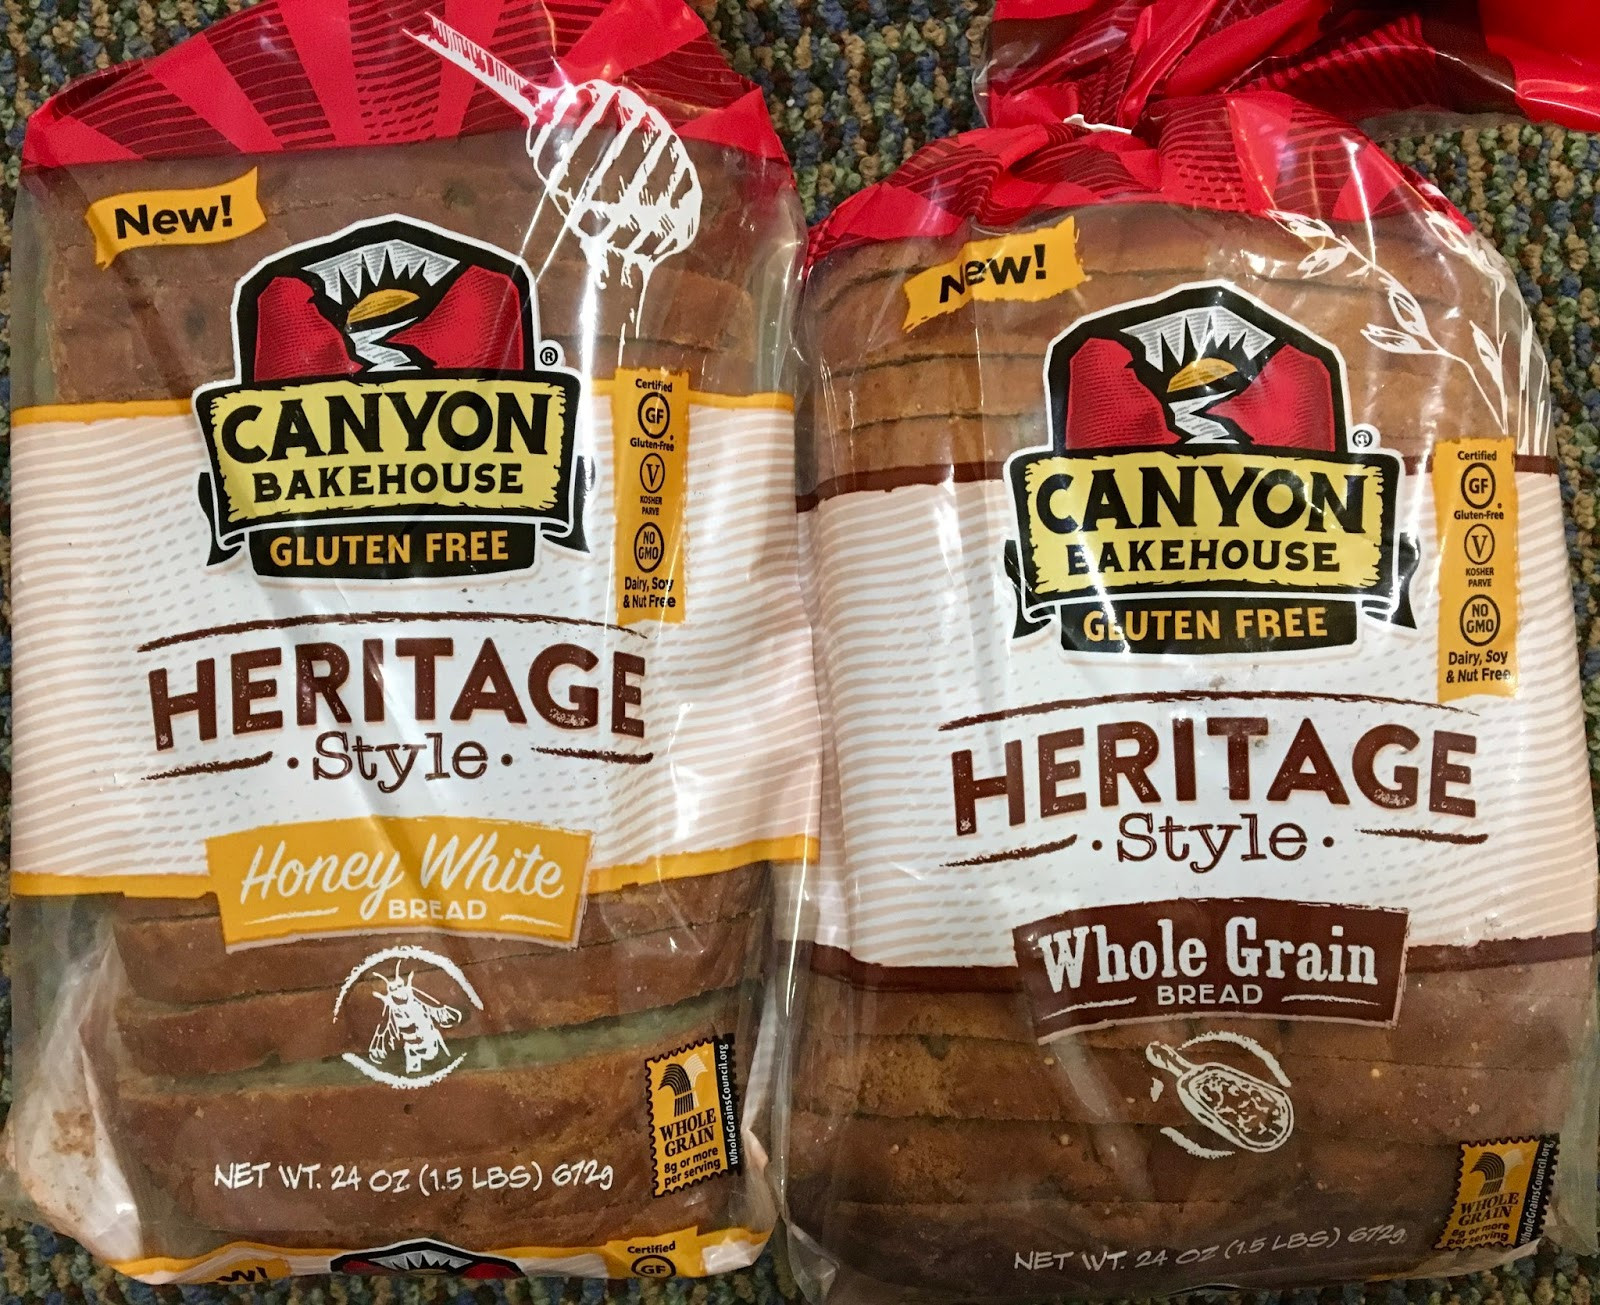 Canyon Bakehouse Gluten Free Bread
 The Gluten & Dairy Free Review Blog Canyon Bakehouse